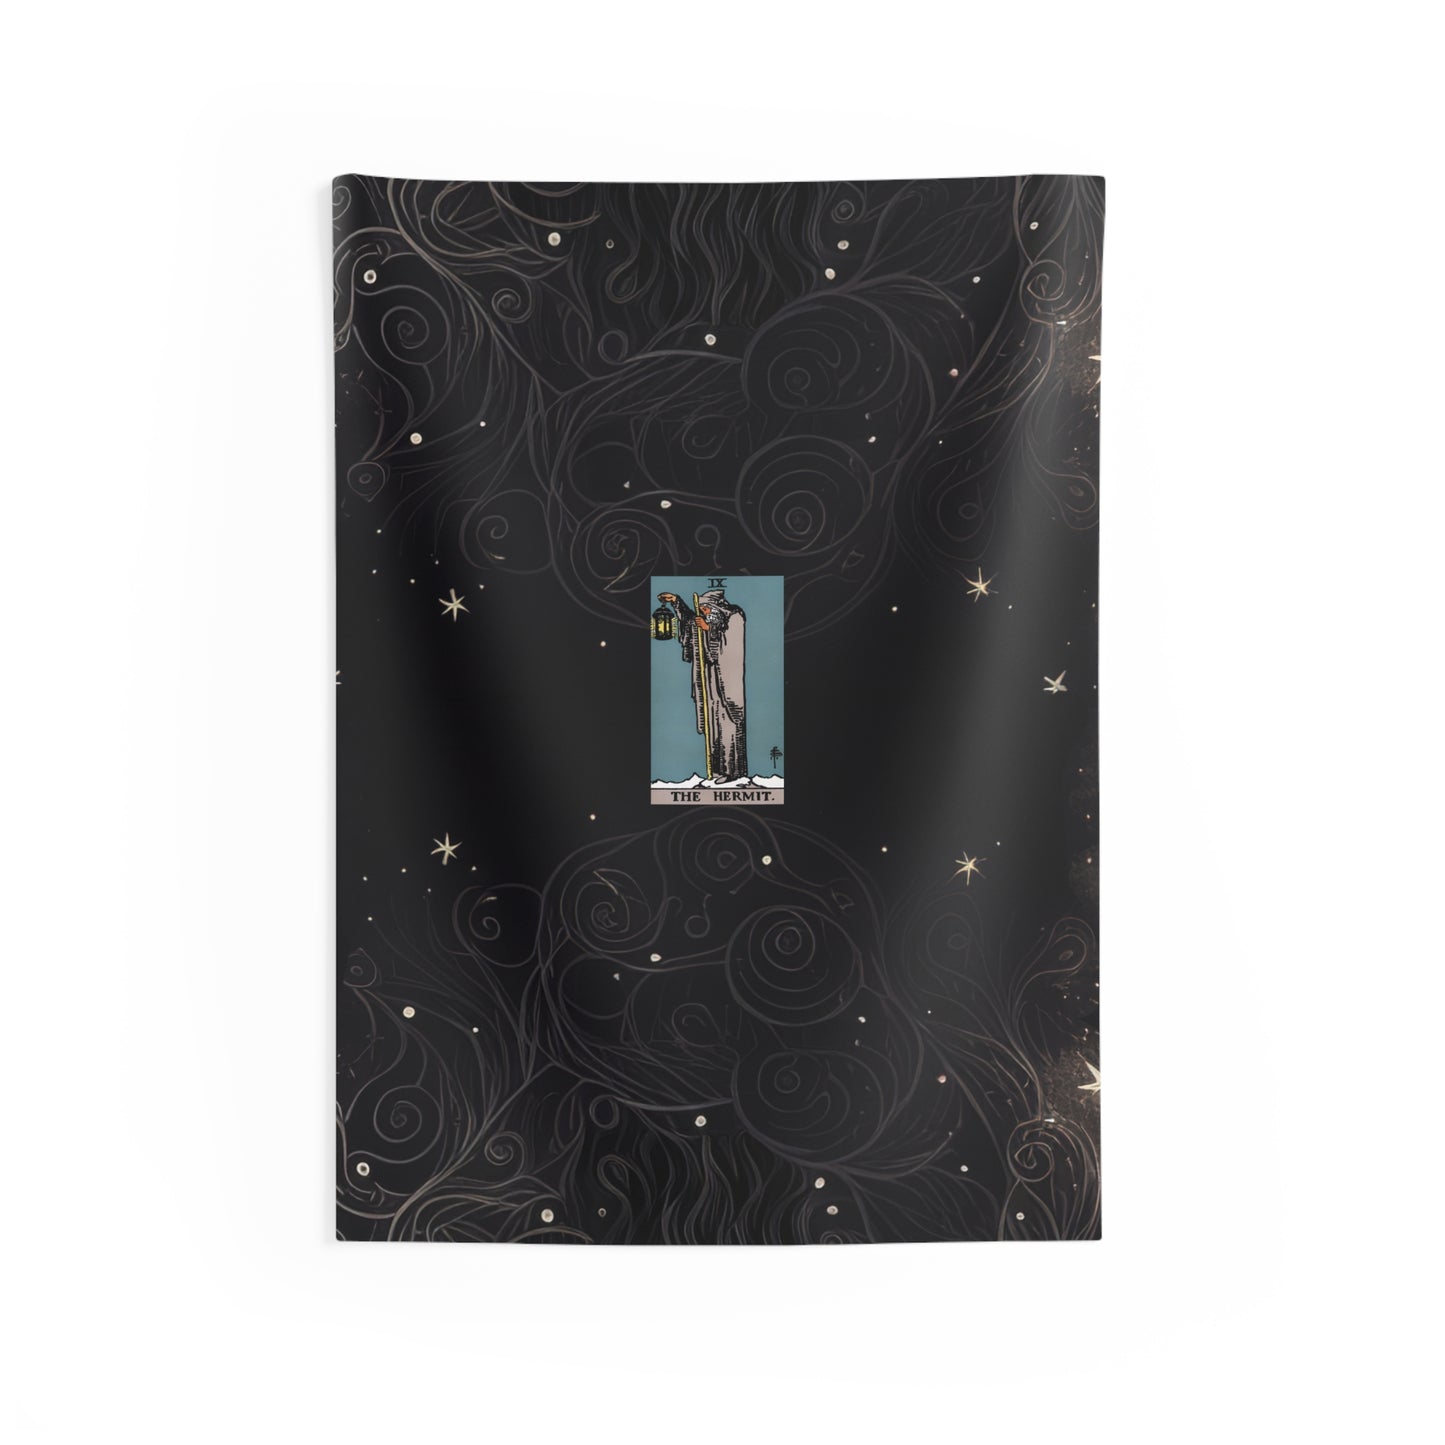 The Hermit Tarot Card Altar Cloth or Tapestry with Starry Background